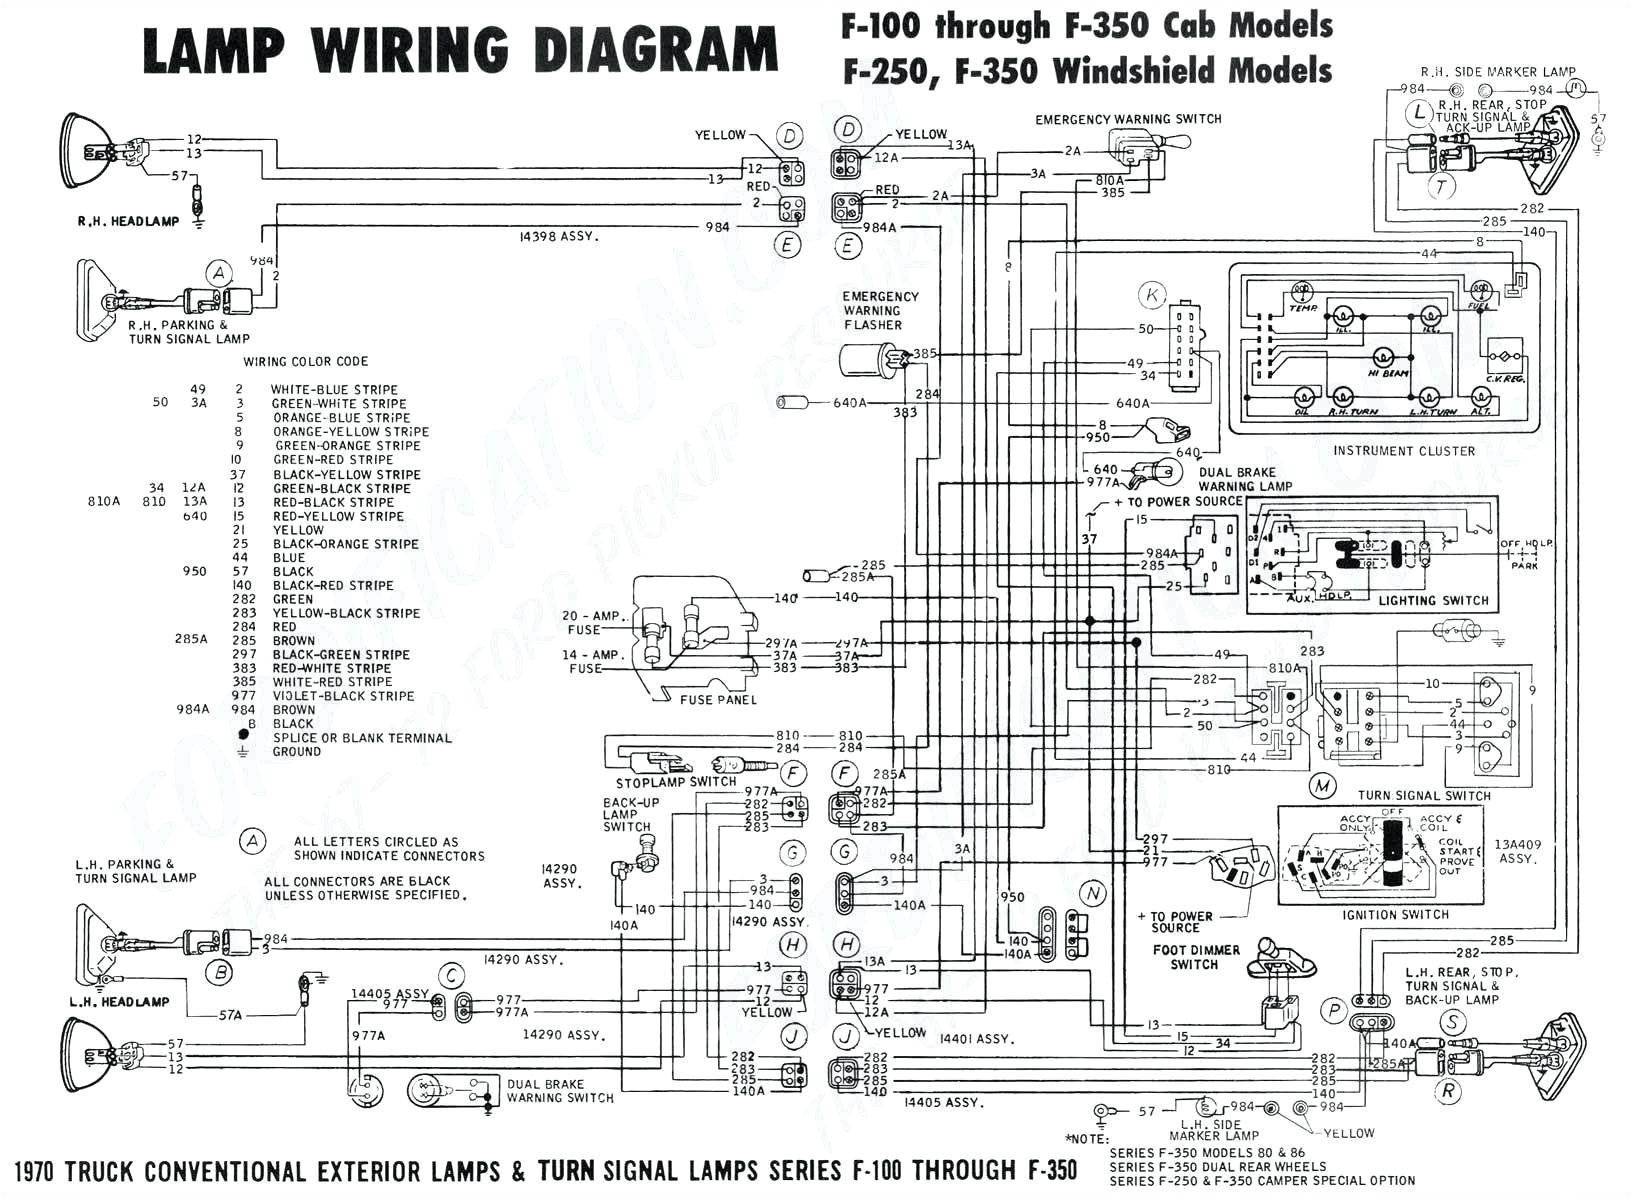 wiring diagram for electric trailer kes wiring circuit diagrams wiring diagram for electric kes wiring circuit diagrams